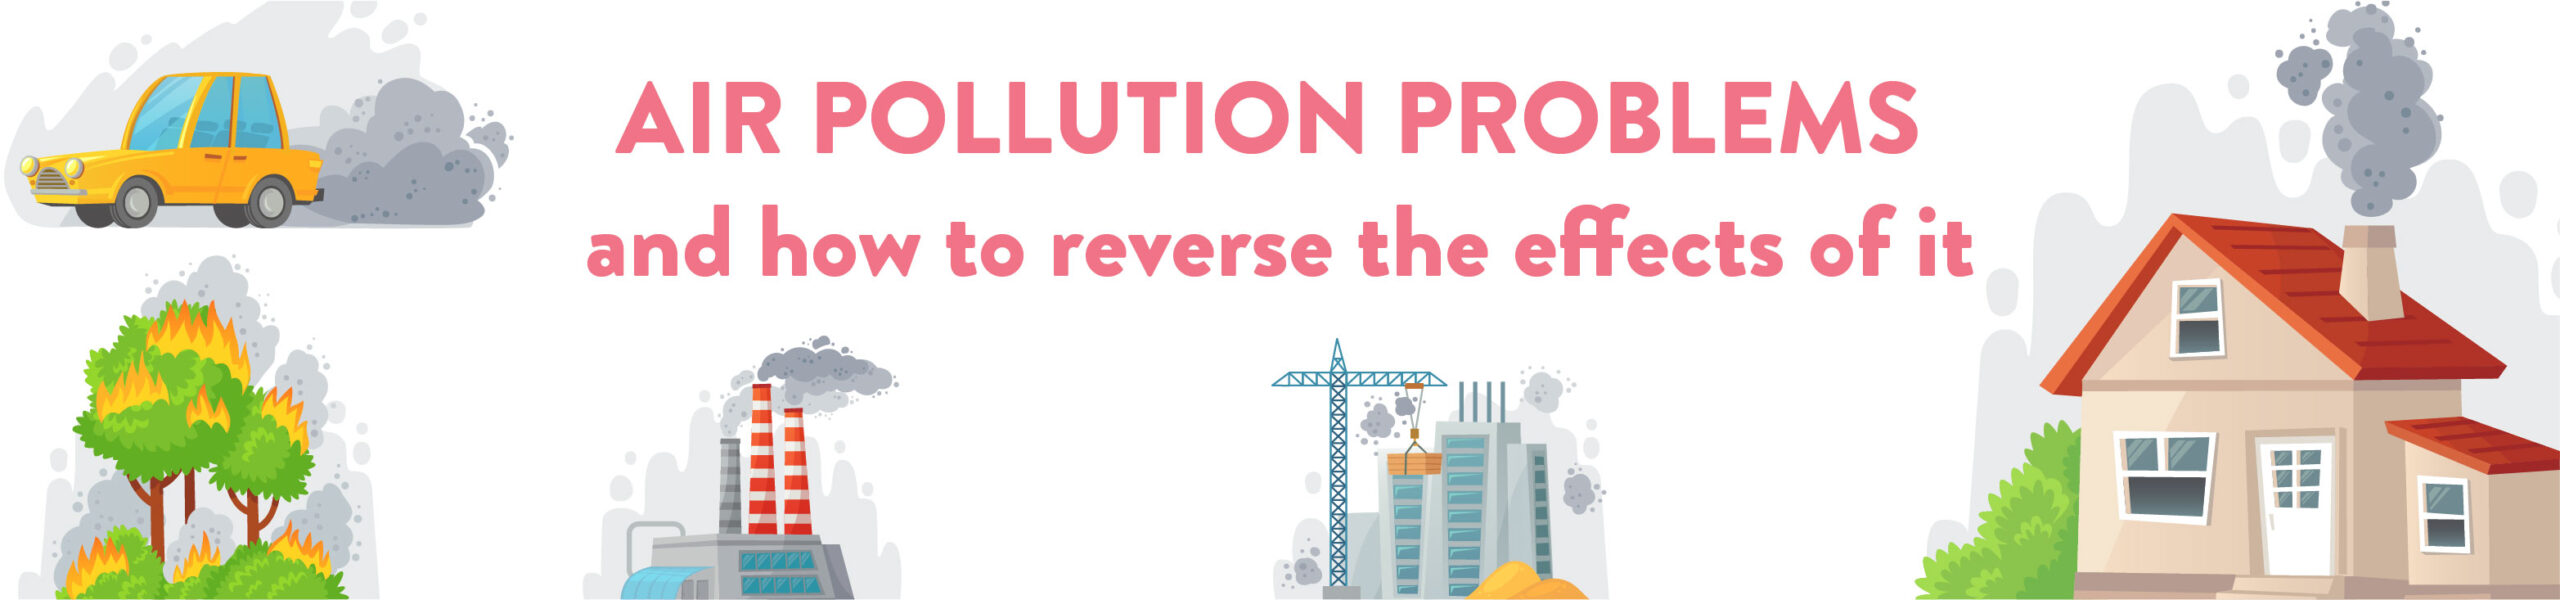 Air-pollution-problems-and-how-to-reverse-the-effects-of-it